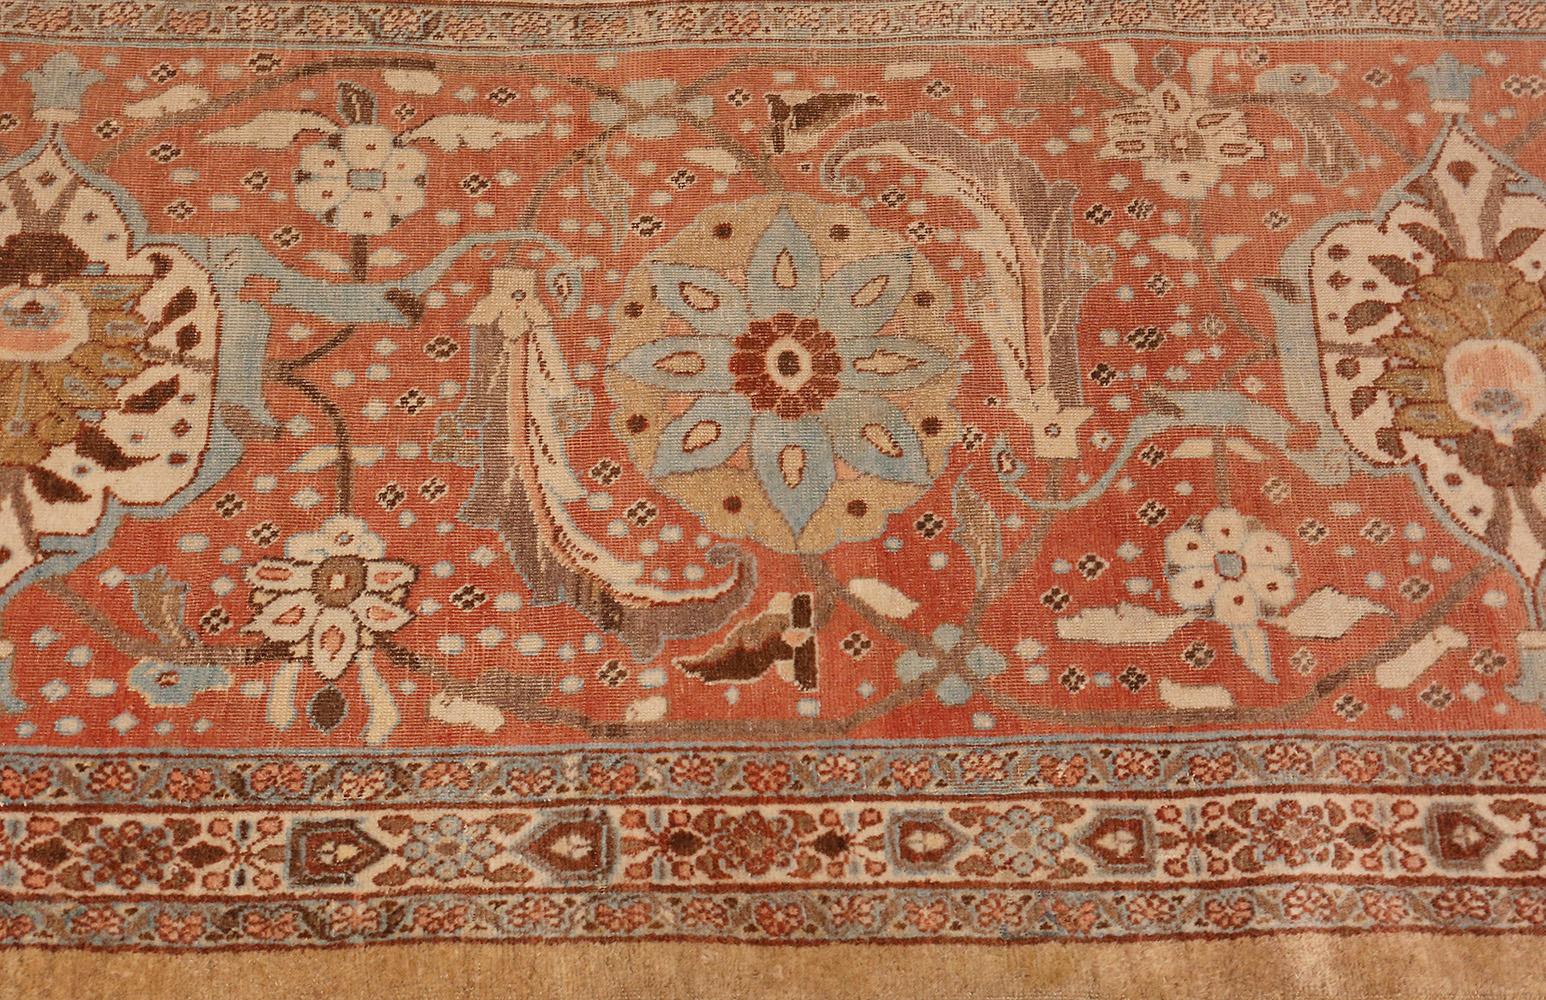 20th Century Large Antique Persian Tabriz Rug. Size: 12 ft 8 in x 17 ft 4 in